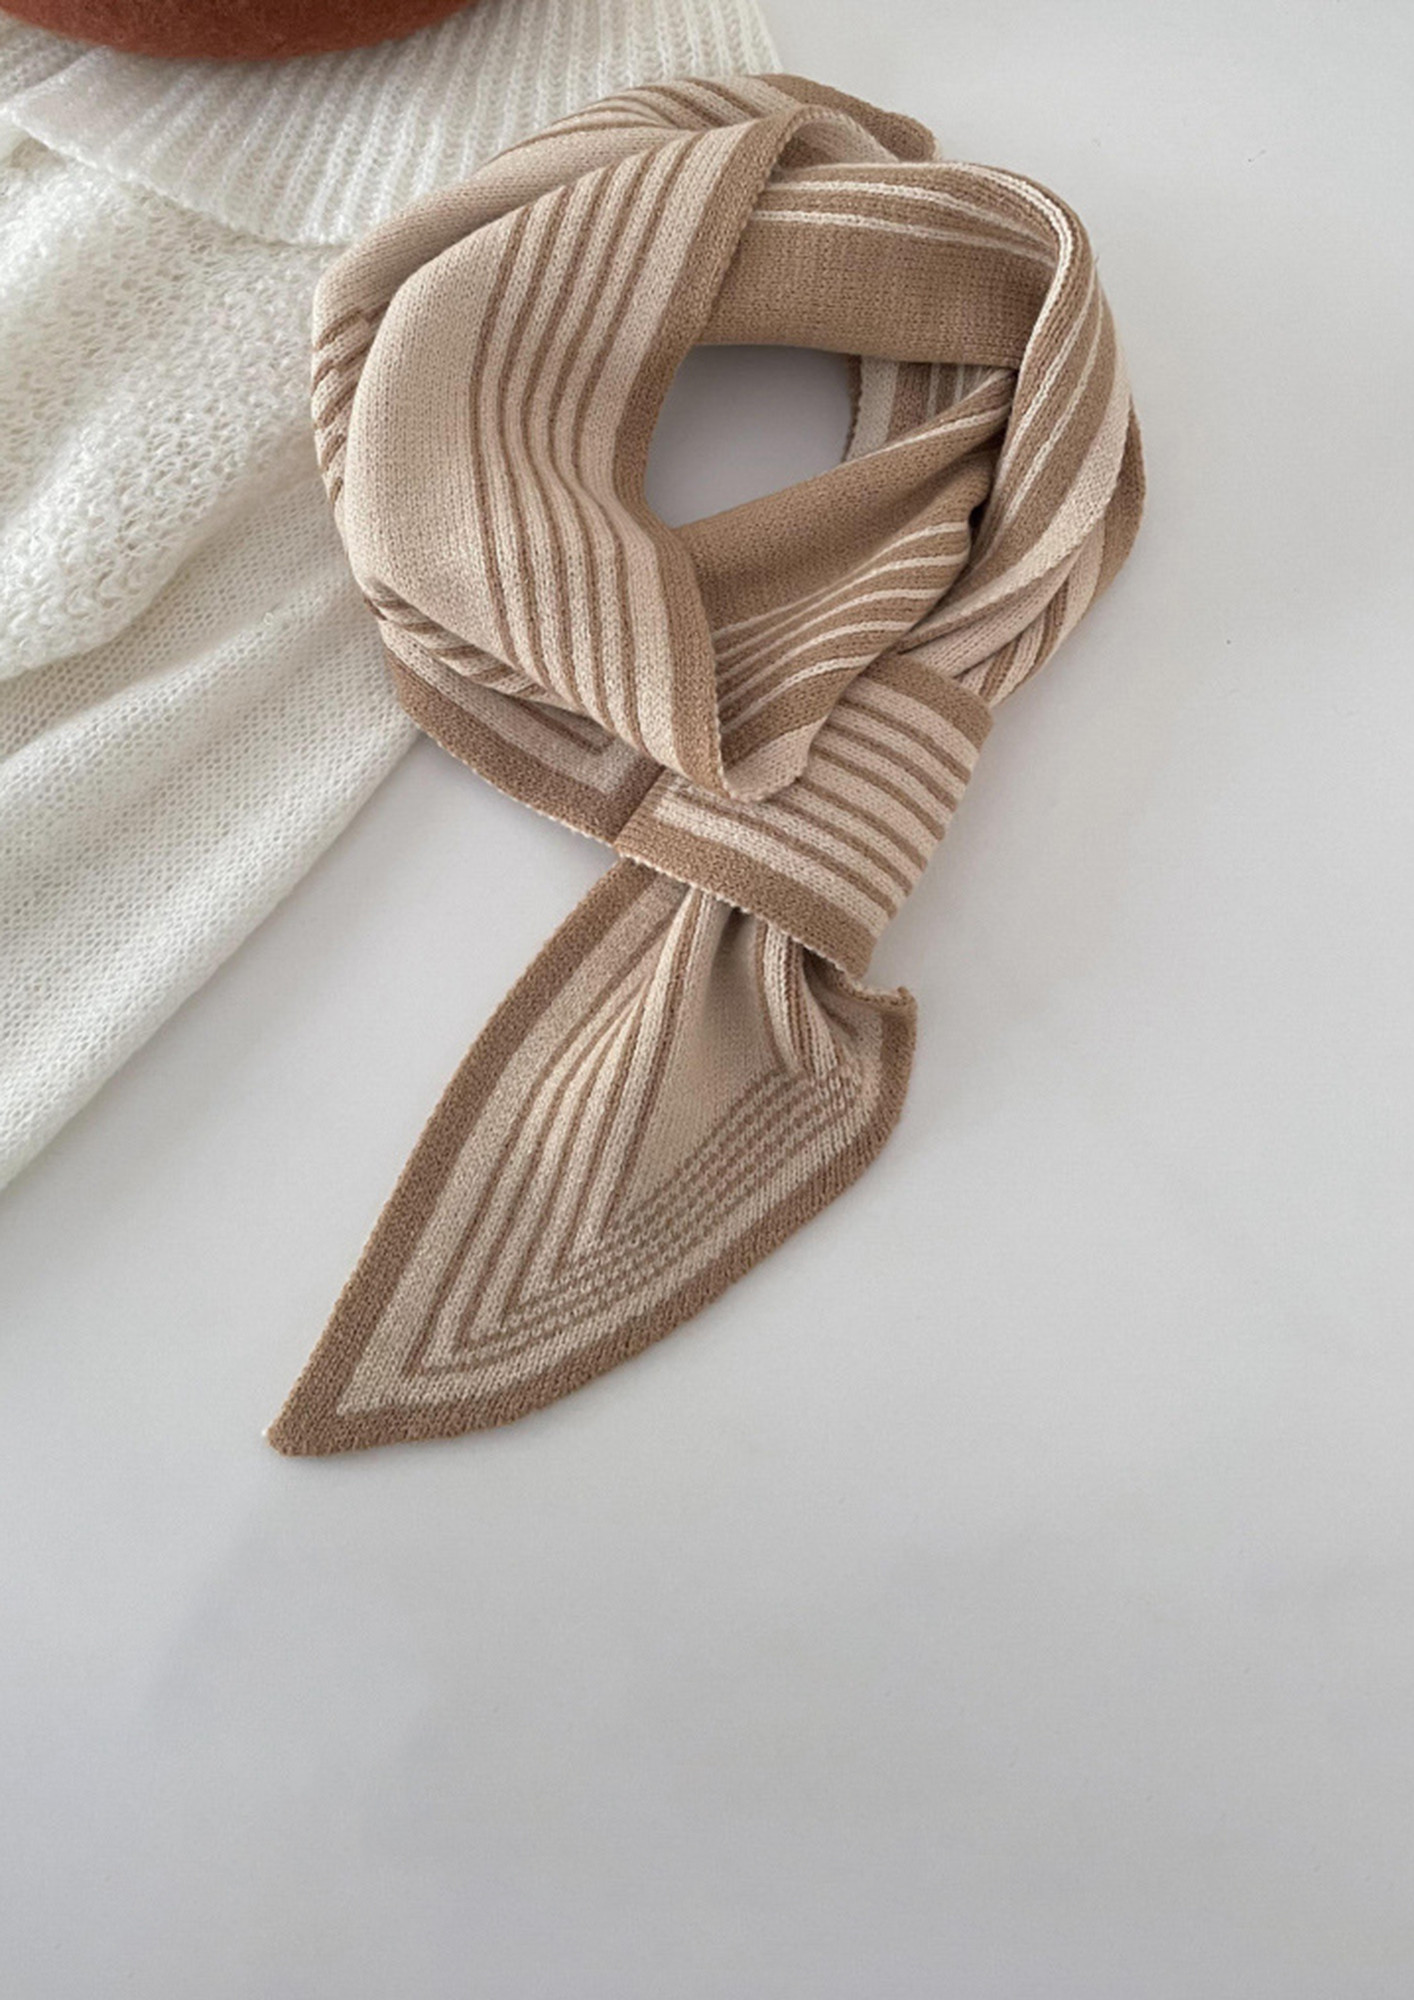 A WARM KNITTED PRINTED BROWN-STRIPE SCARF